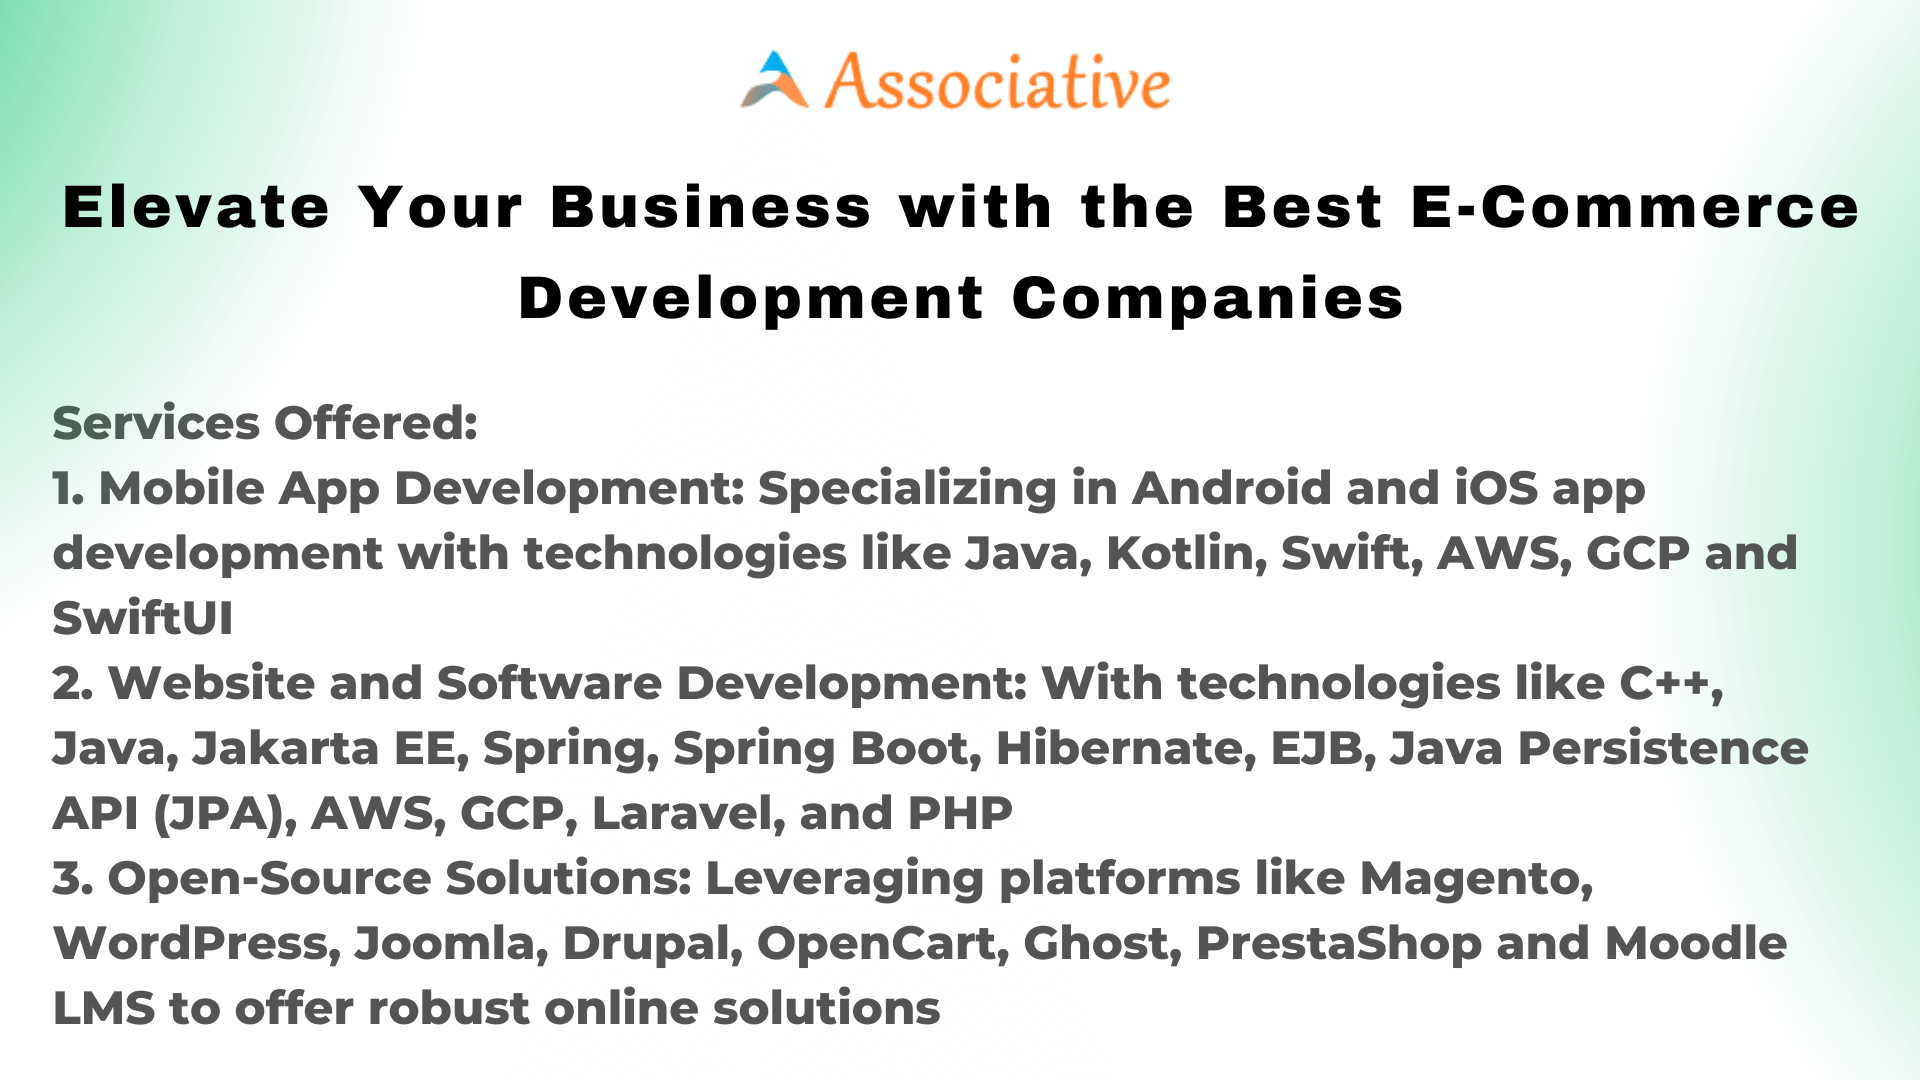 Elevate Your Business with the Best E-Commerce Development Companies